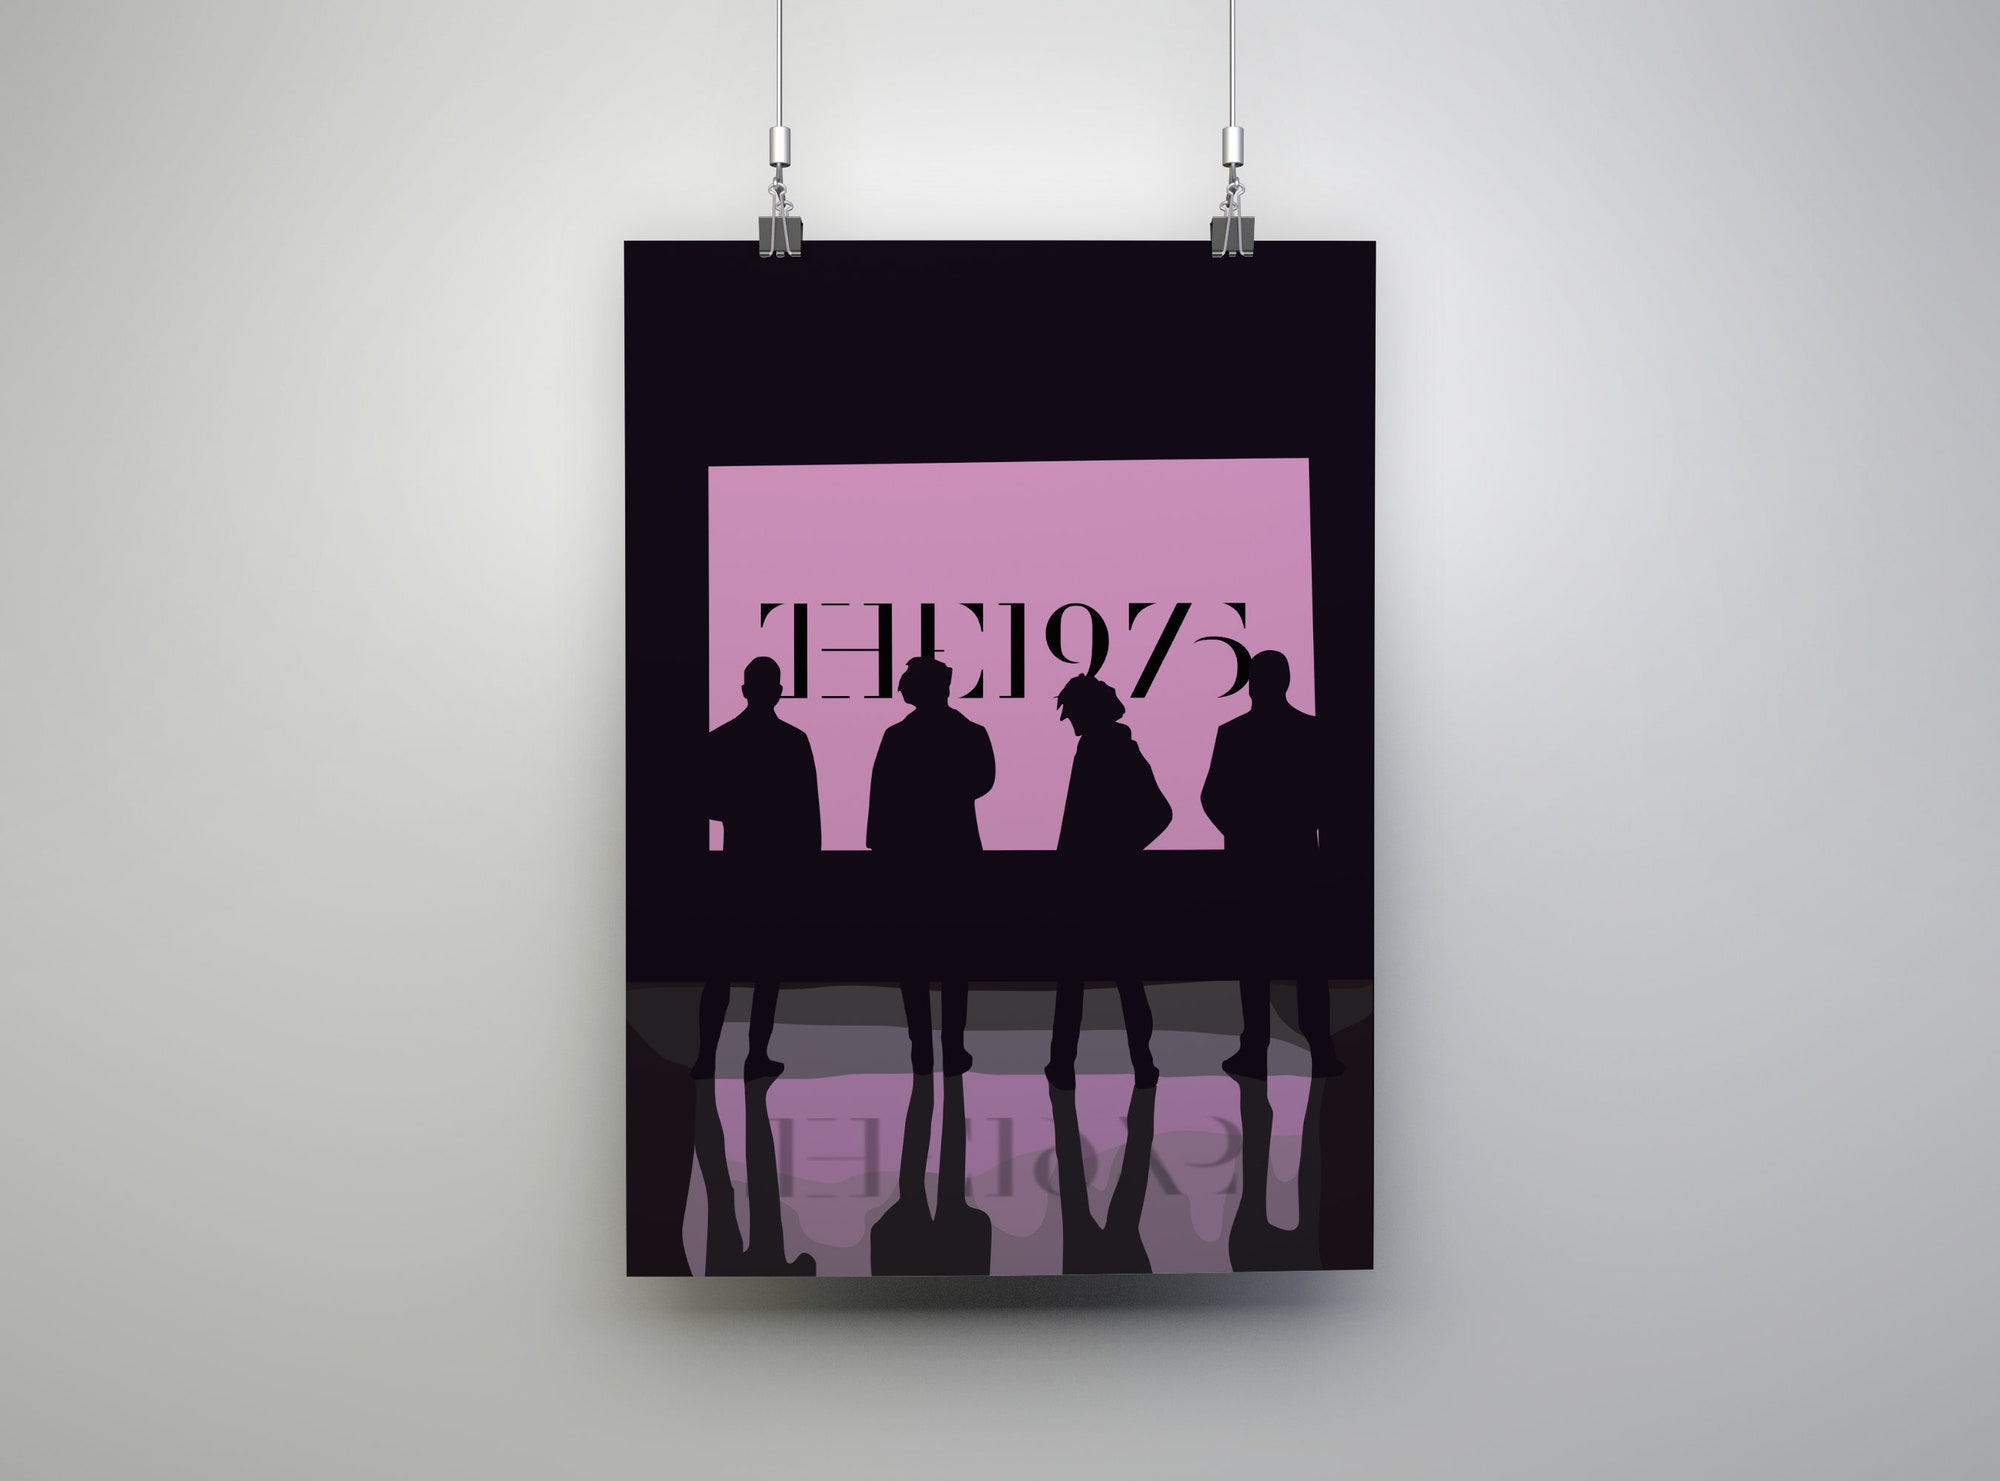 The 1975 Concert Poster